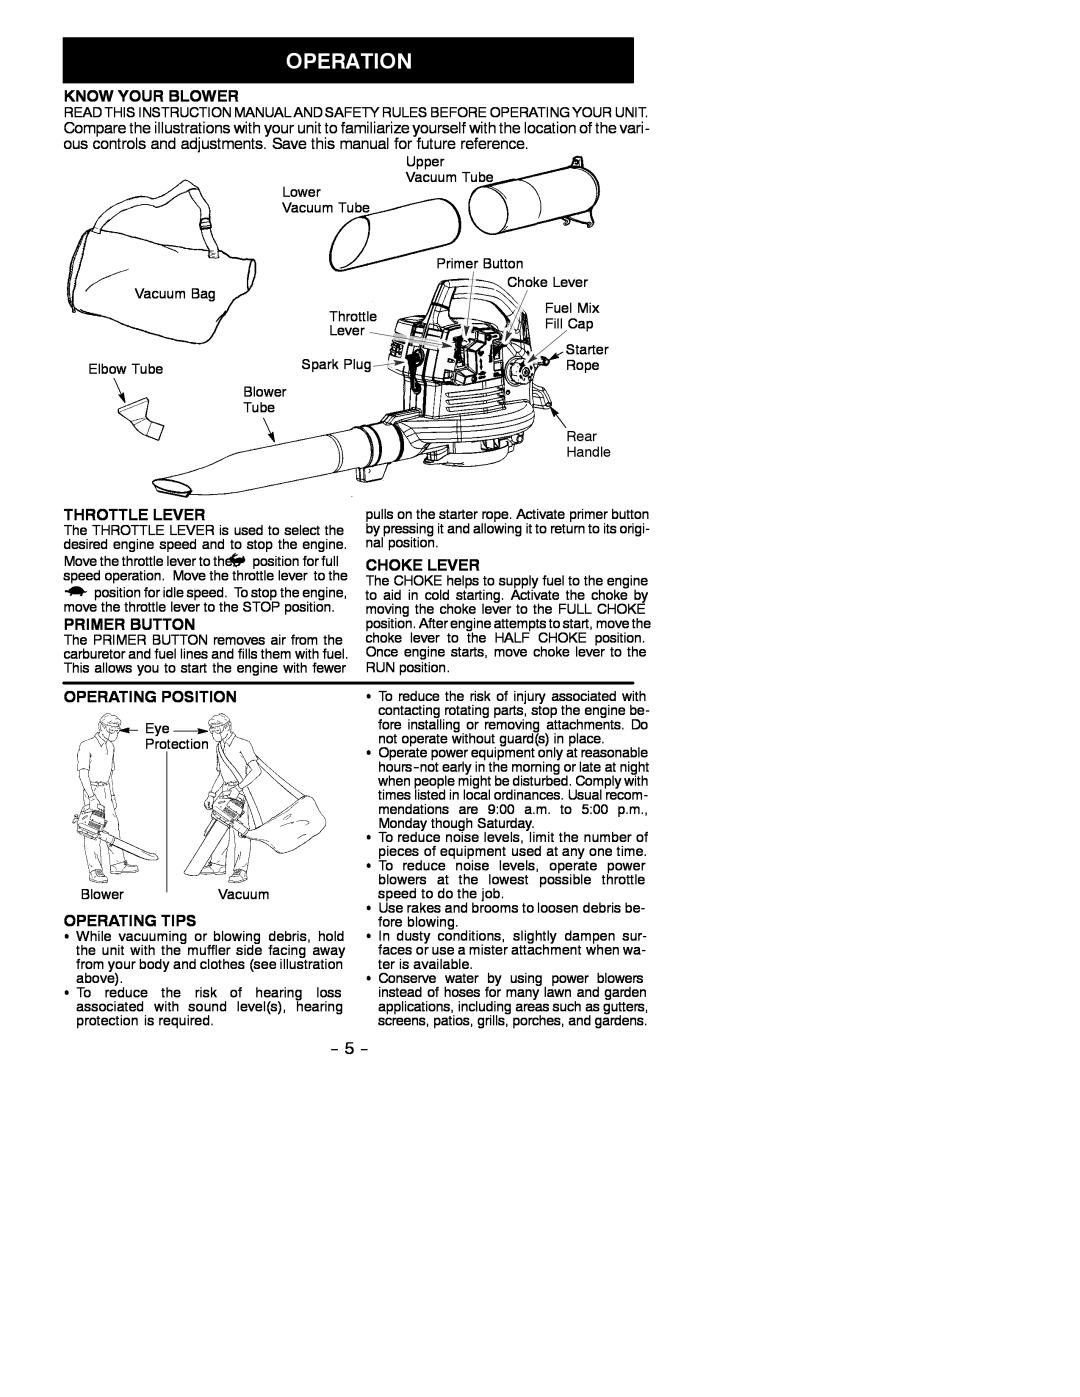 Weed Eater 530088127 Know Your Blower, Throttle Lever, Choke Lever, Primer Button, Operating Position, Operating Tips 